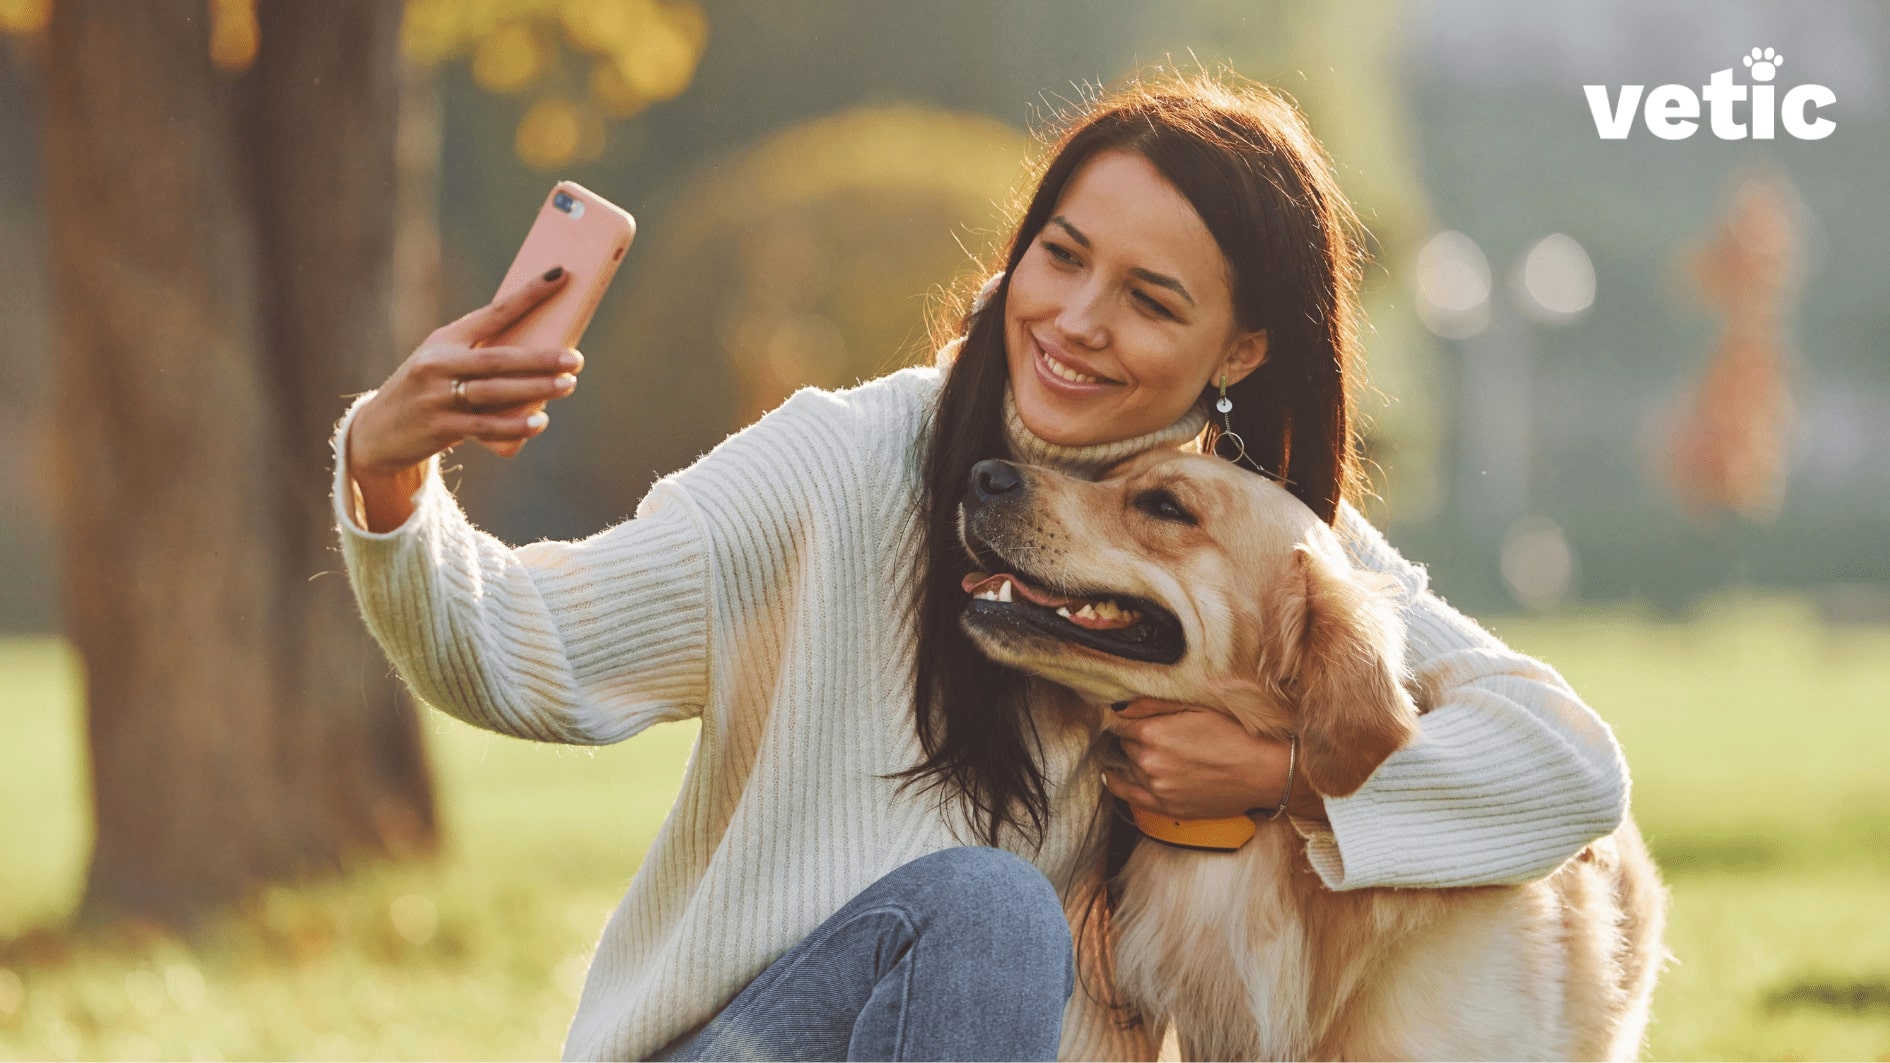 Woman at the park taking a selfie with her golden retriever